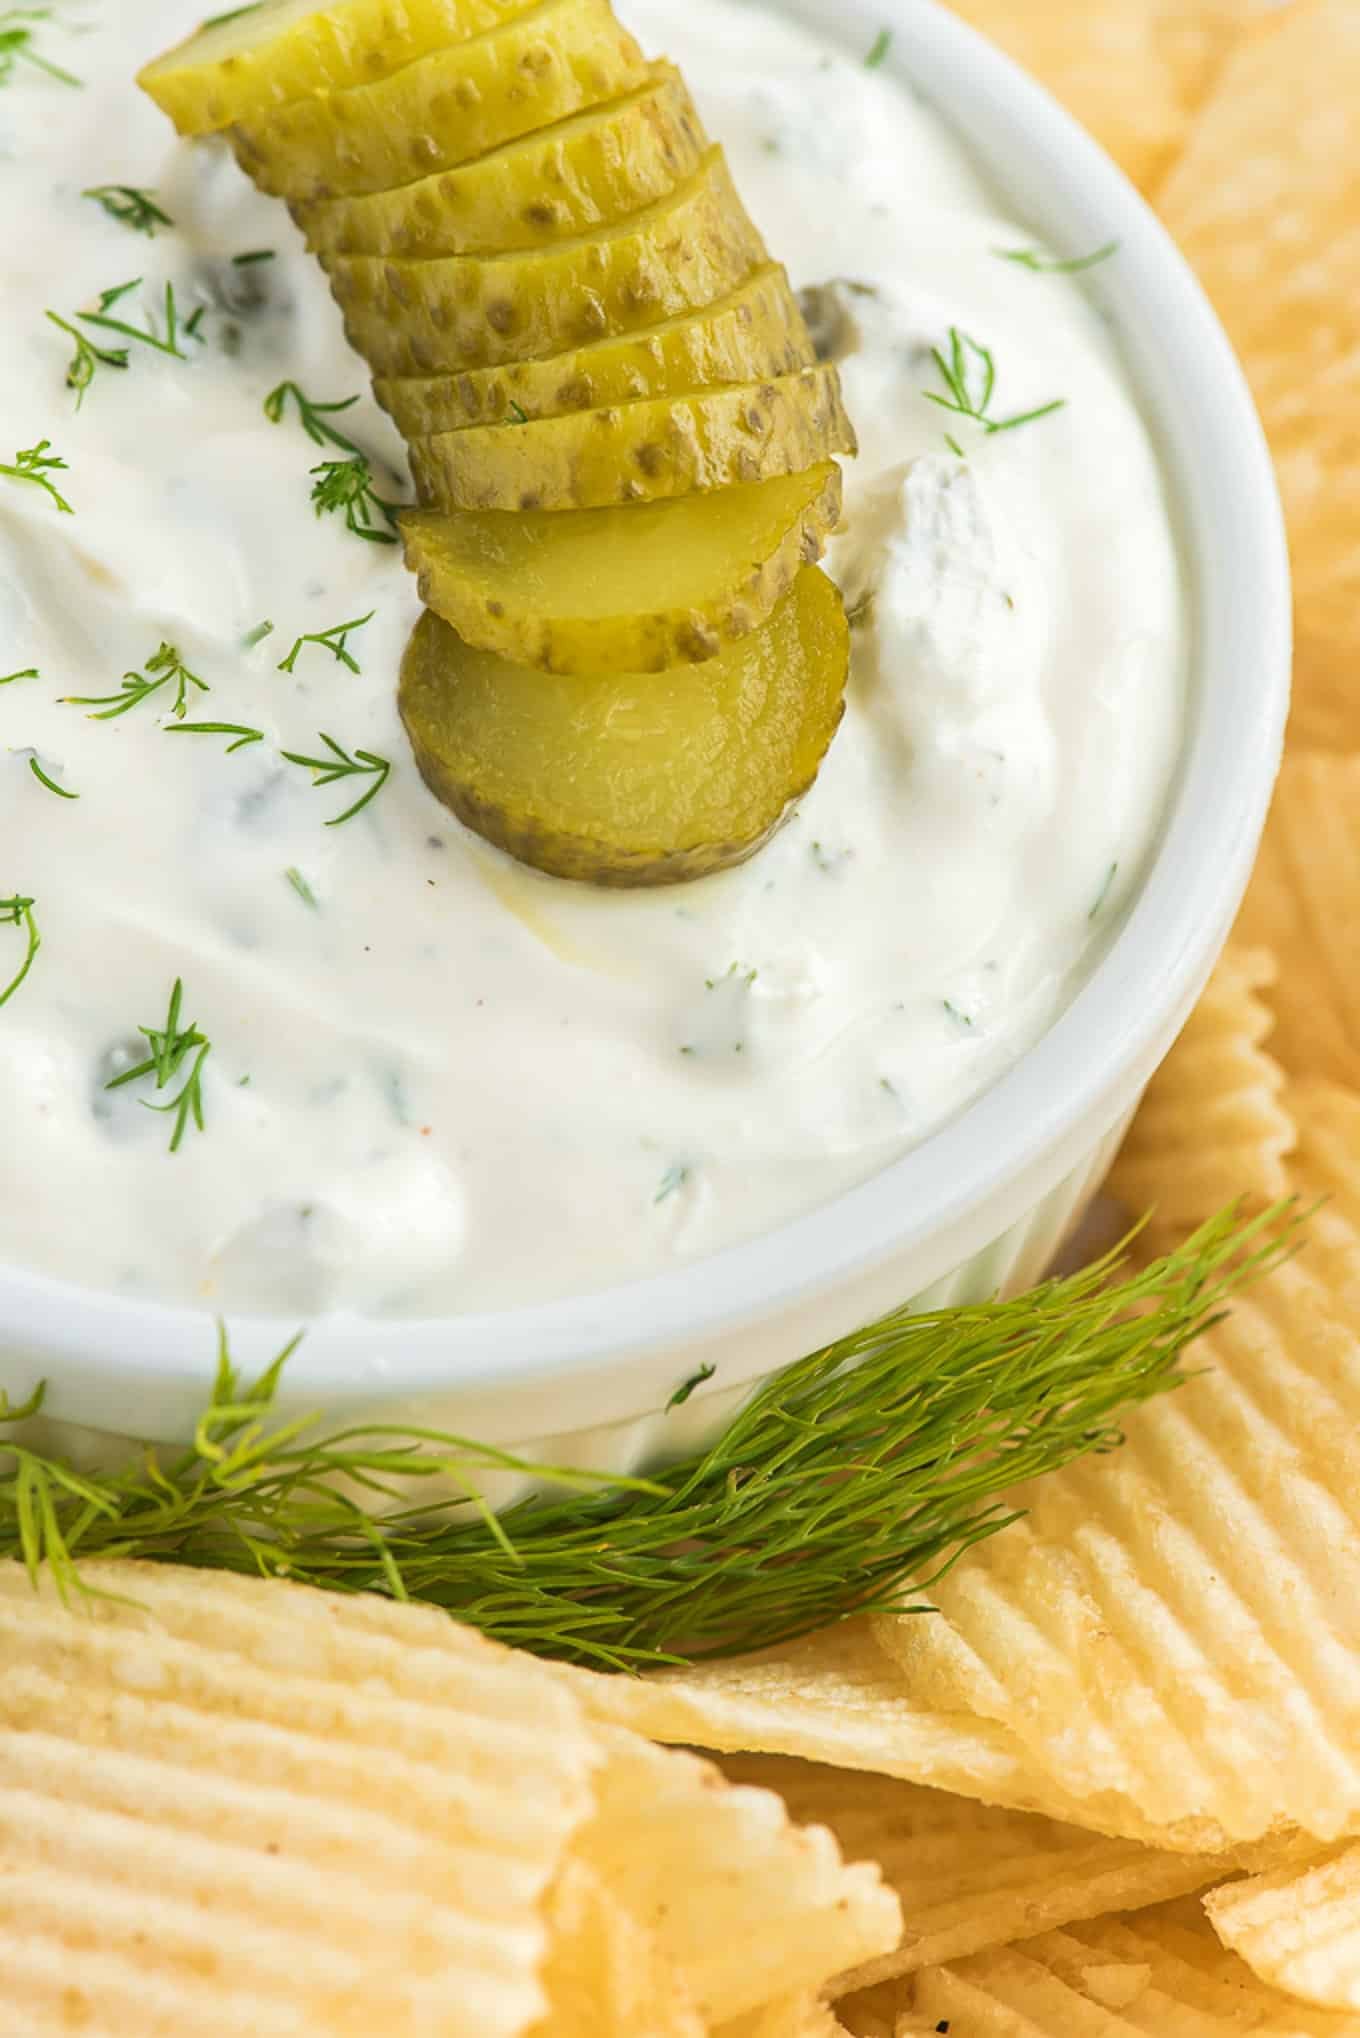 Dill dip garnished with dill and pickles.